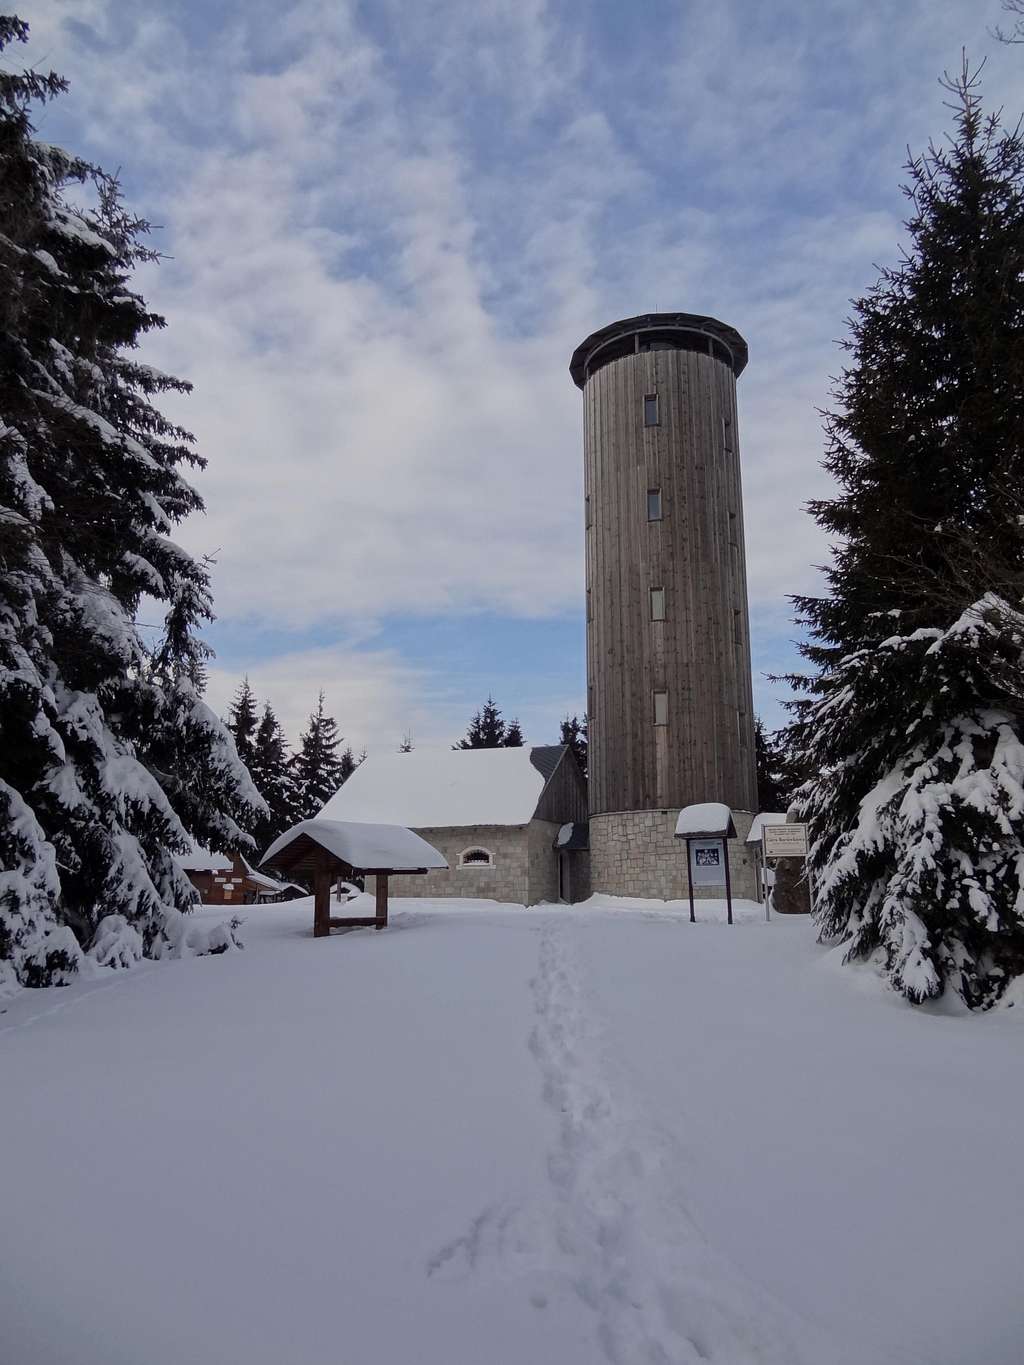 Borówkowa Góra outlook tower in winter, arriving from the south Polish trail 